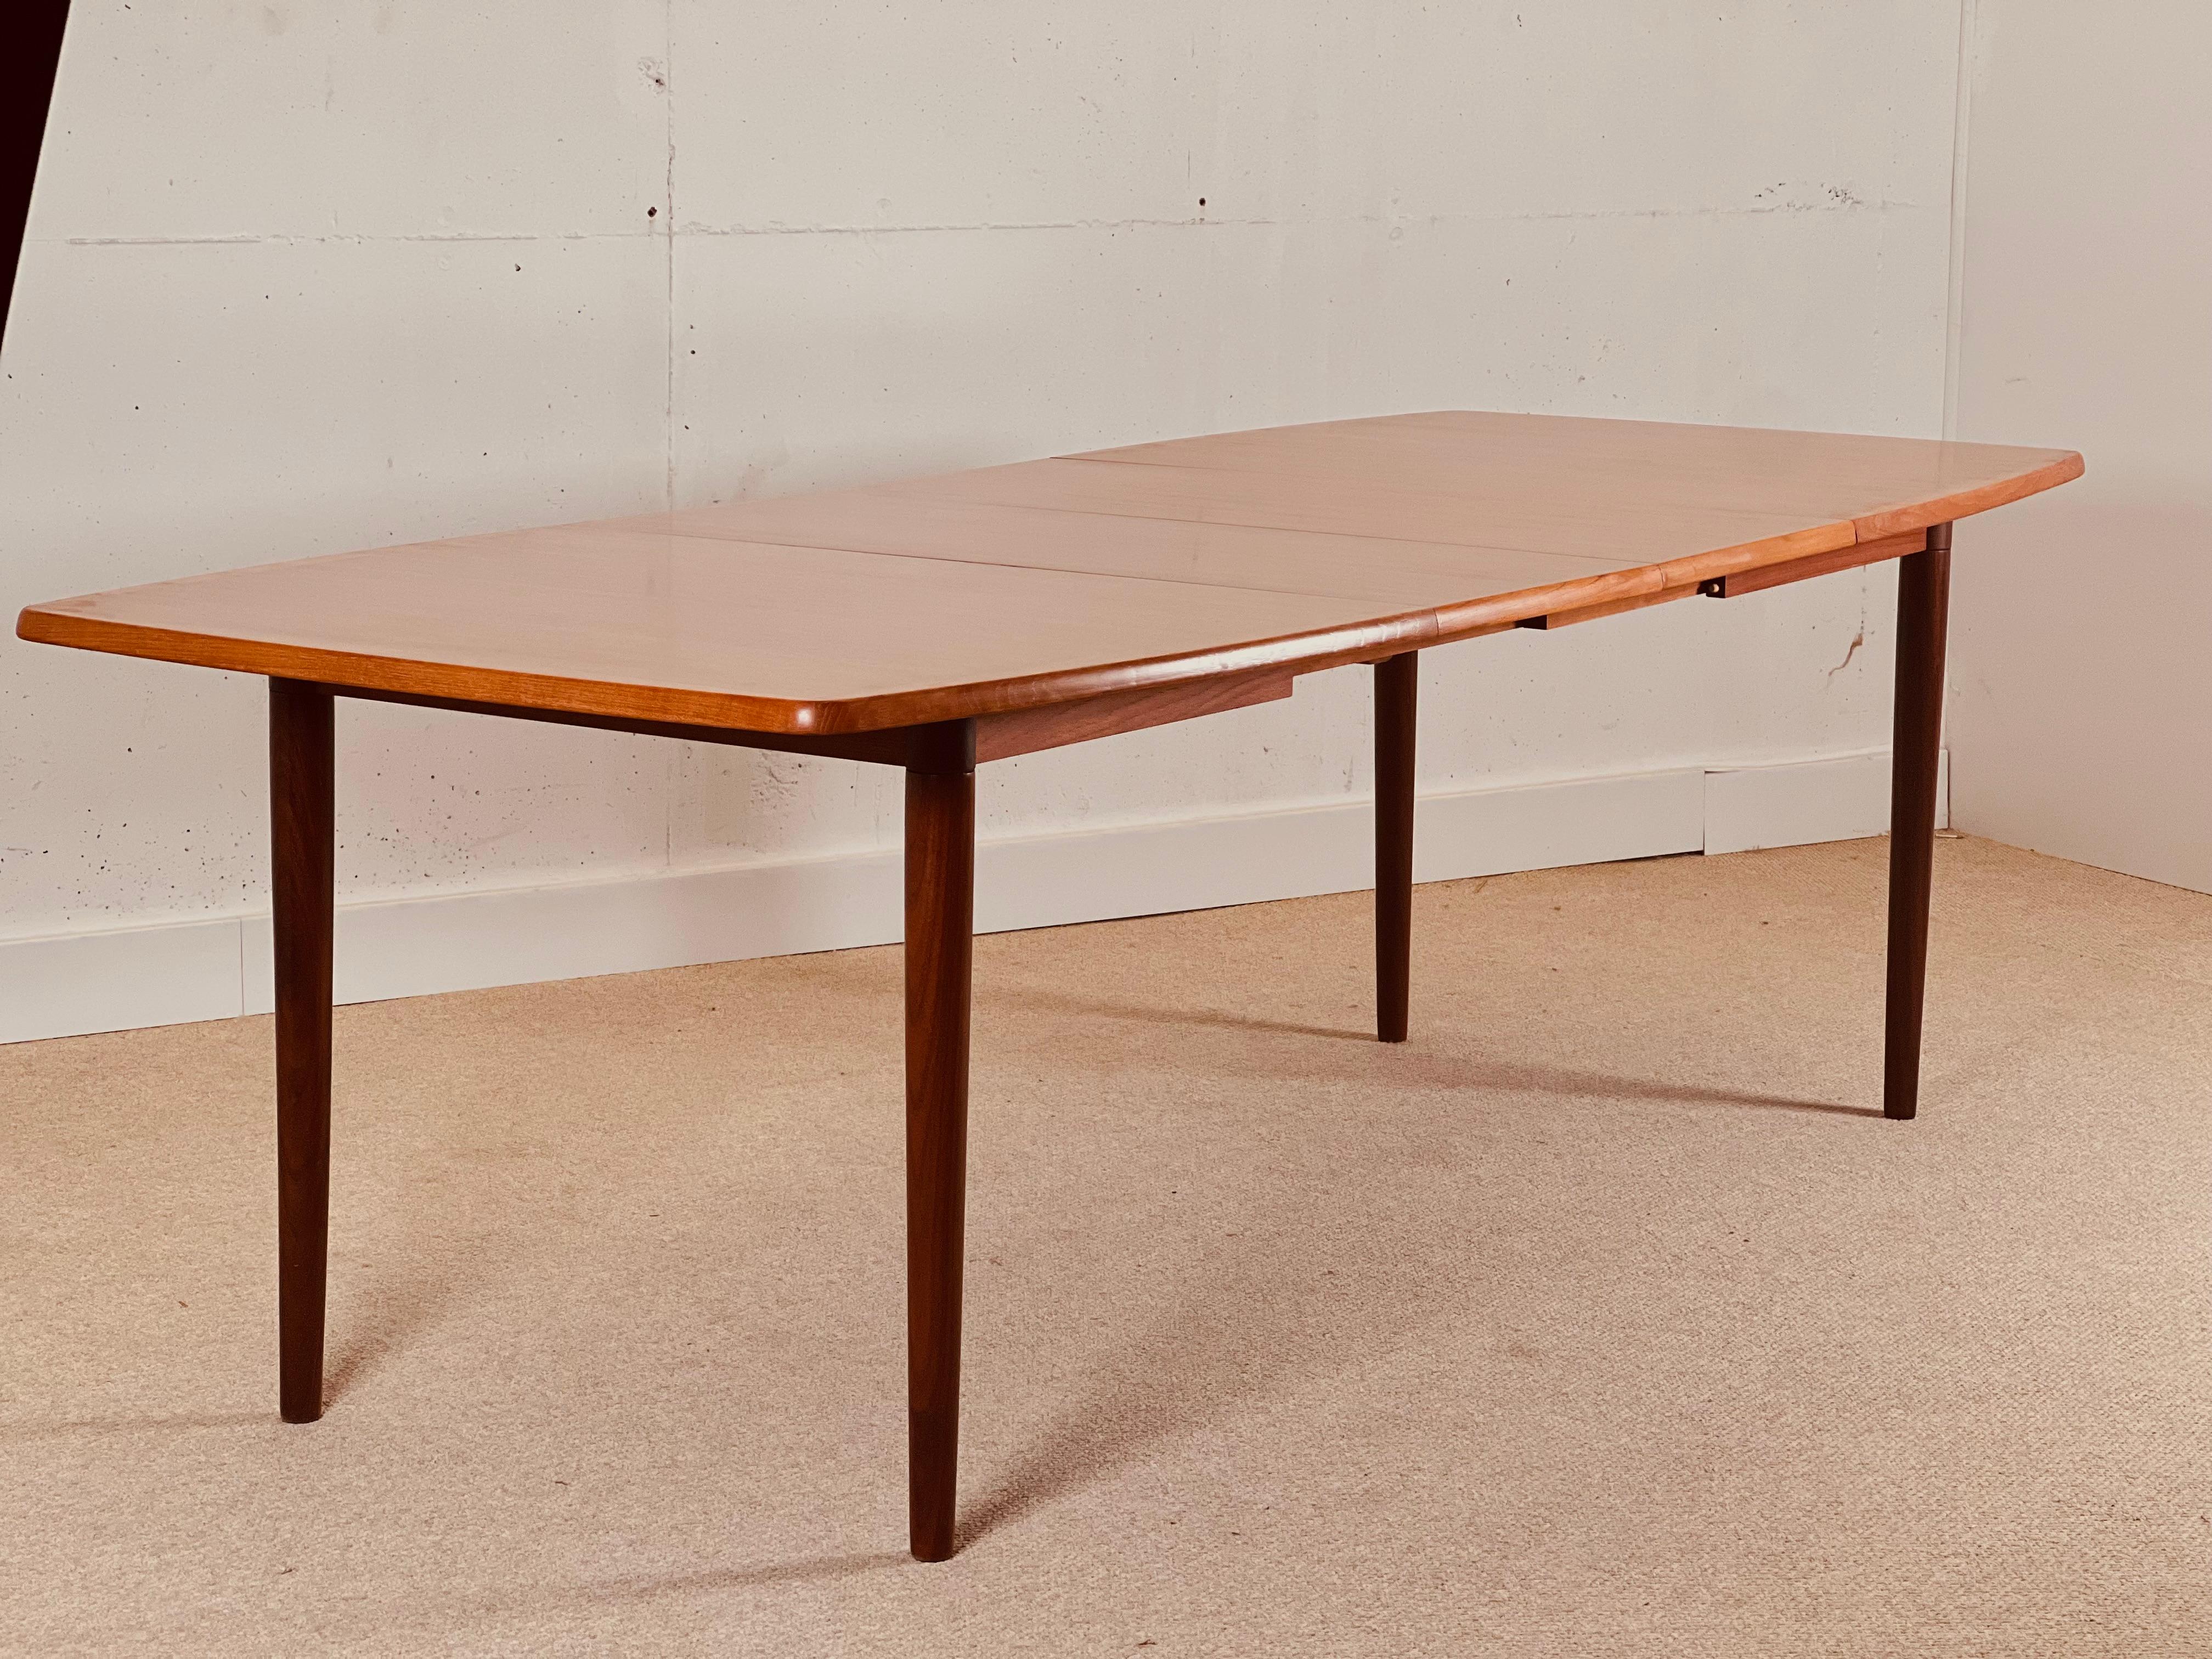 Teak Scandinavian dining table with double extension.